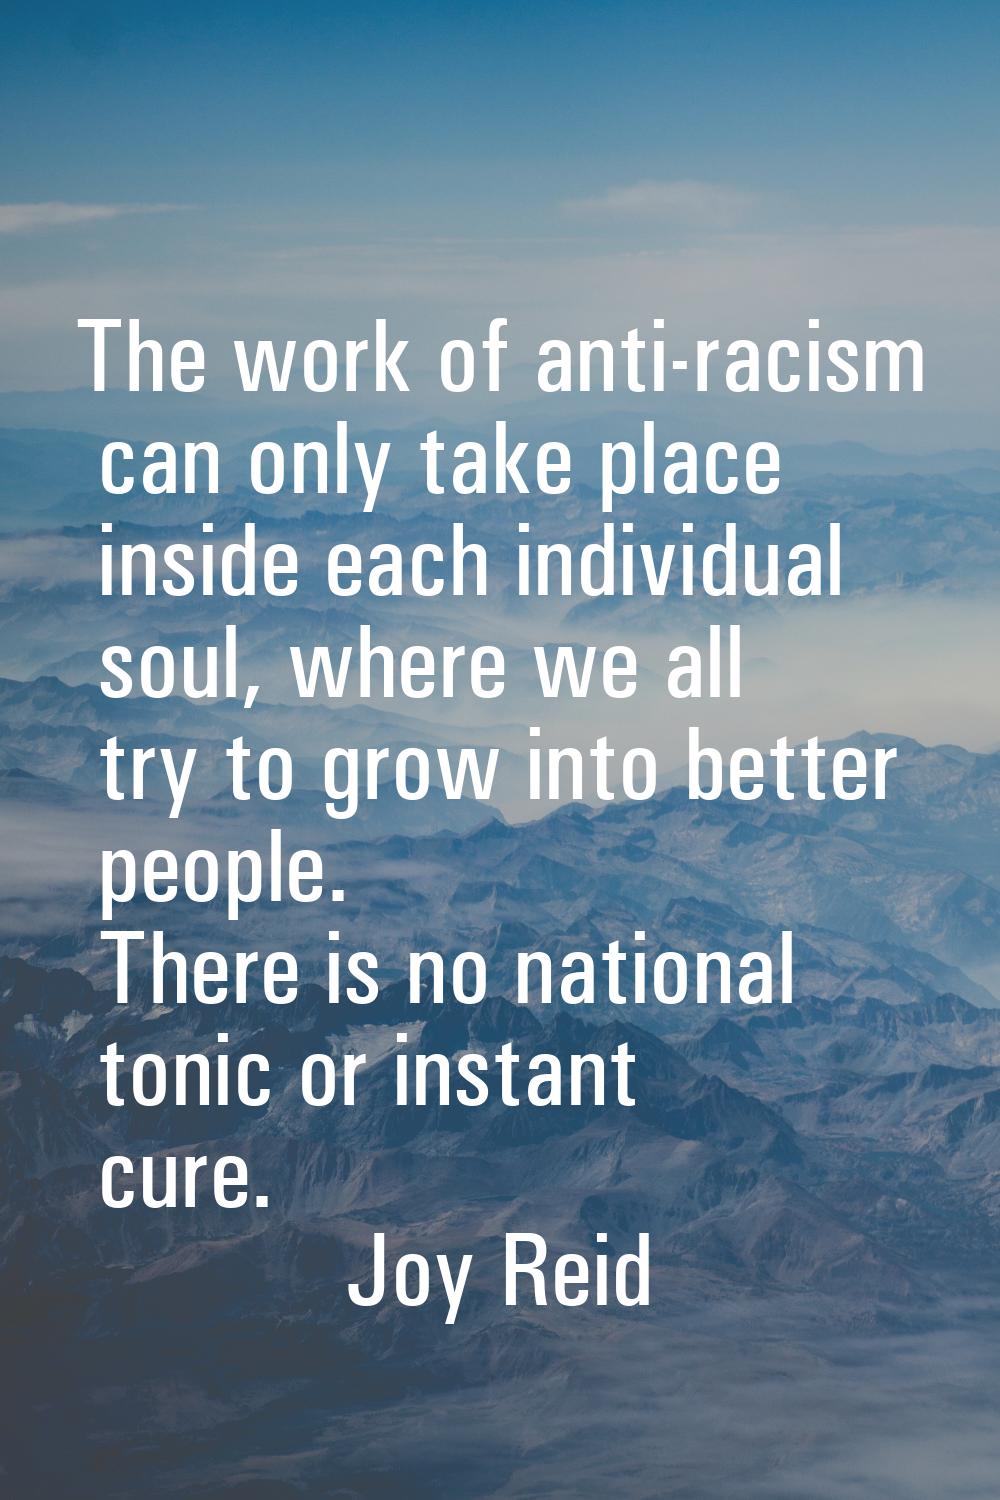 The work of anti-racism can only take place inside each individual soul, where we all try to grow i